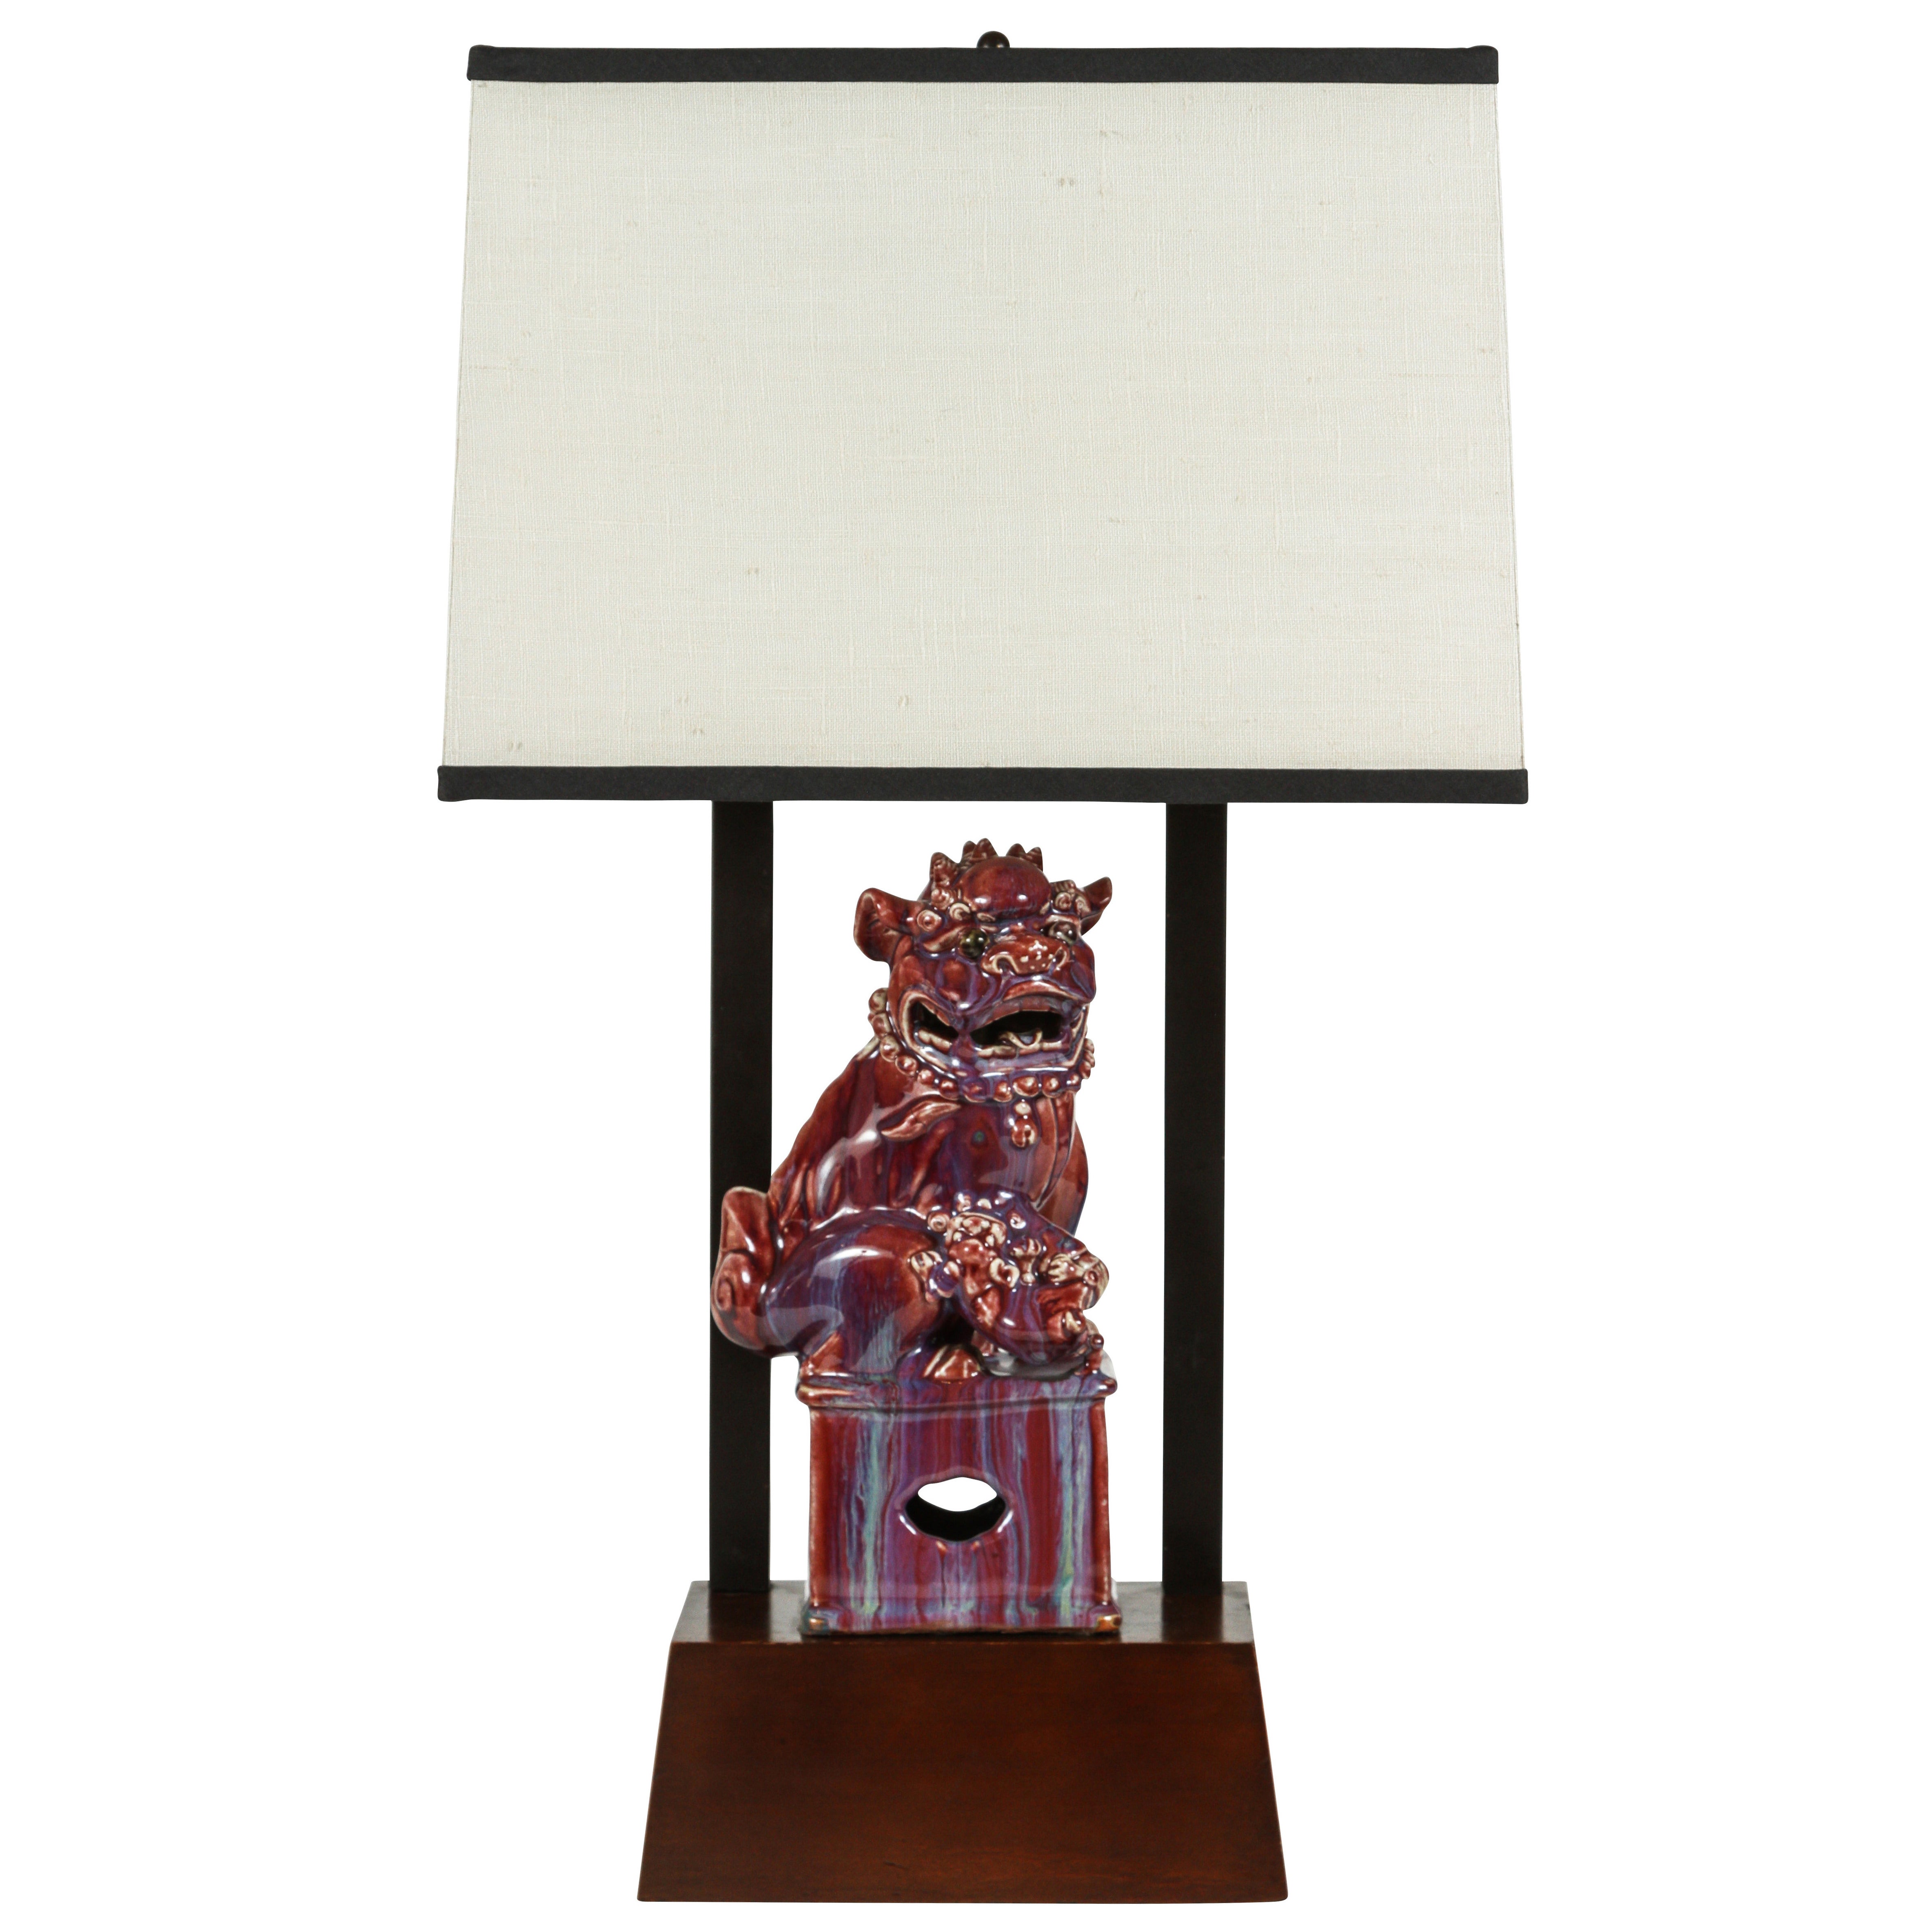 Armature Lamp Featuring a Chinese Foo Dog by William Haines